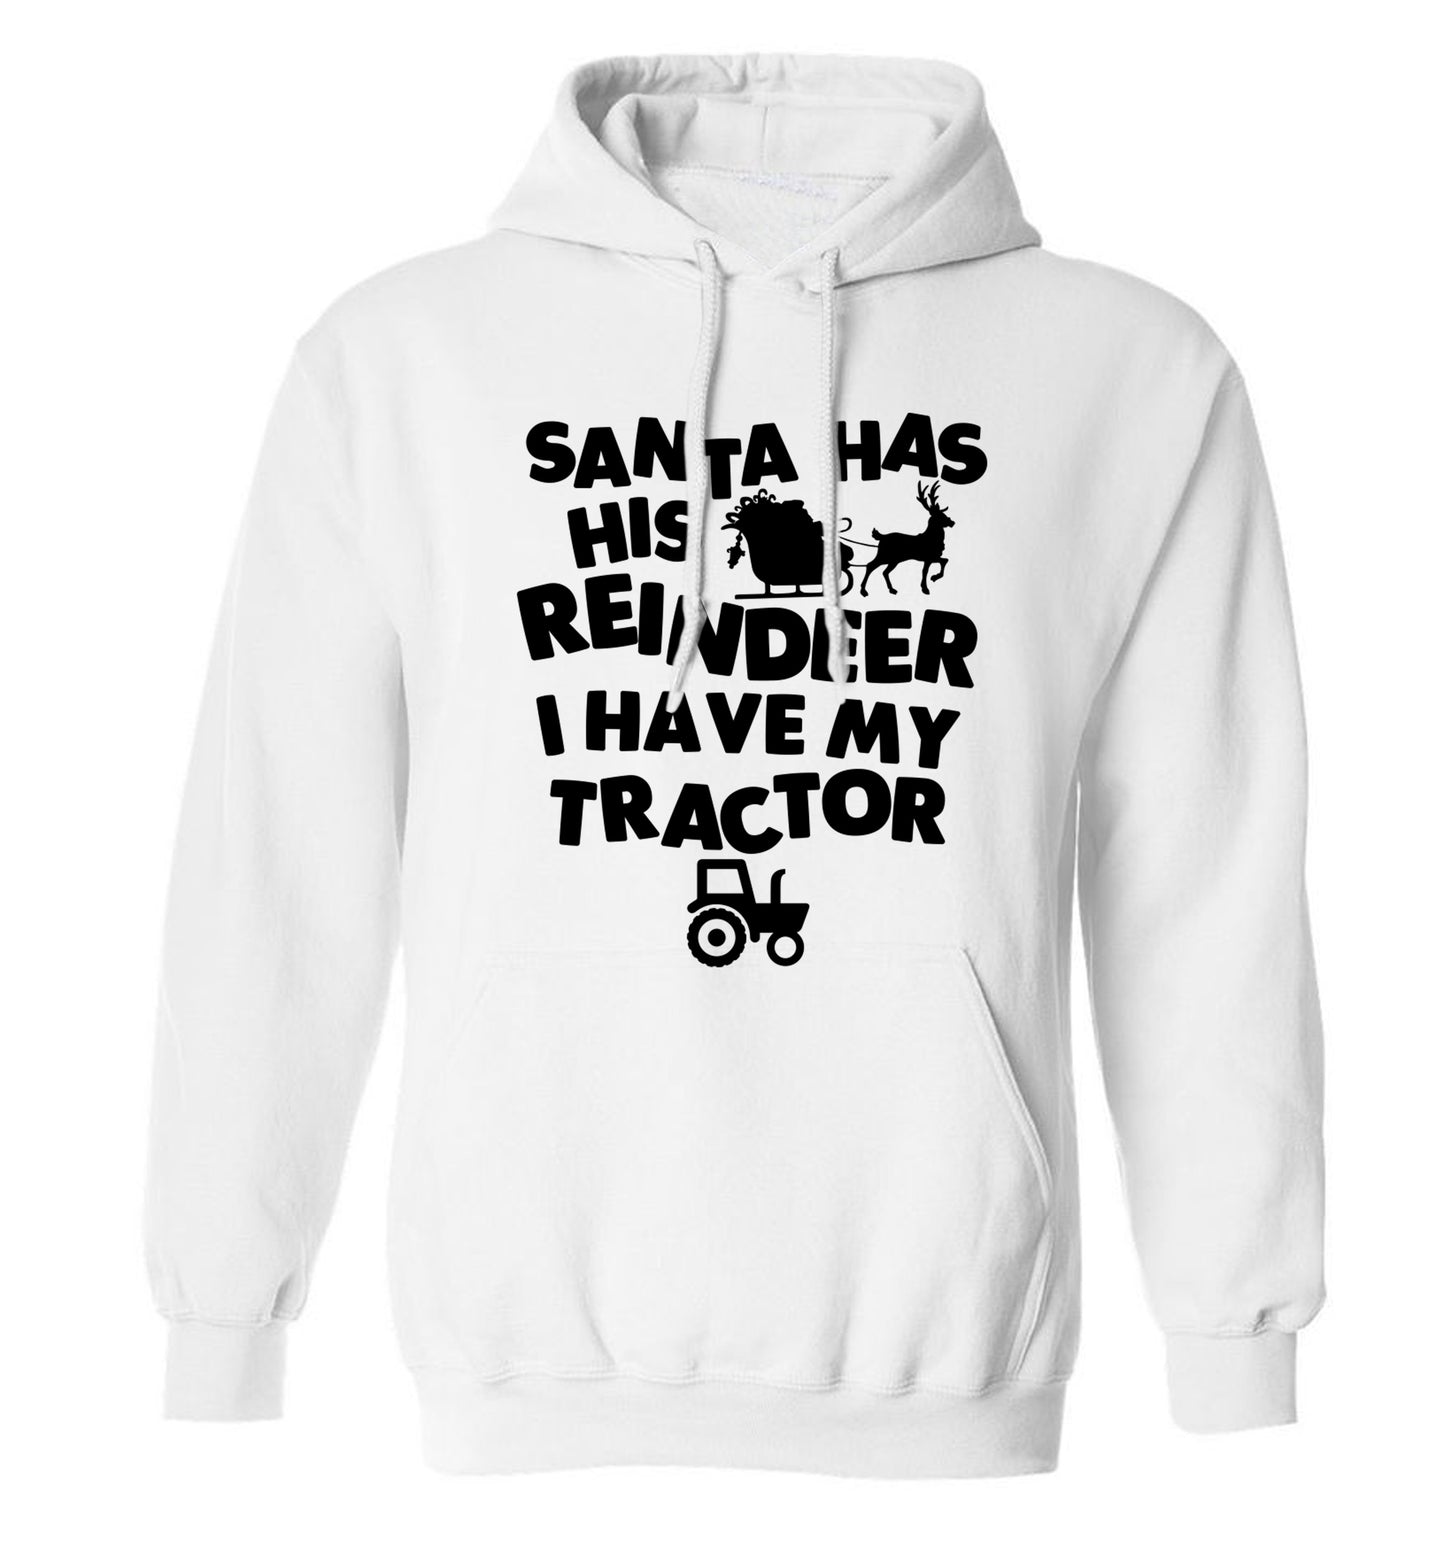 Santa has his reindeer I have my tractor adults unisex white hoodie 2XL